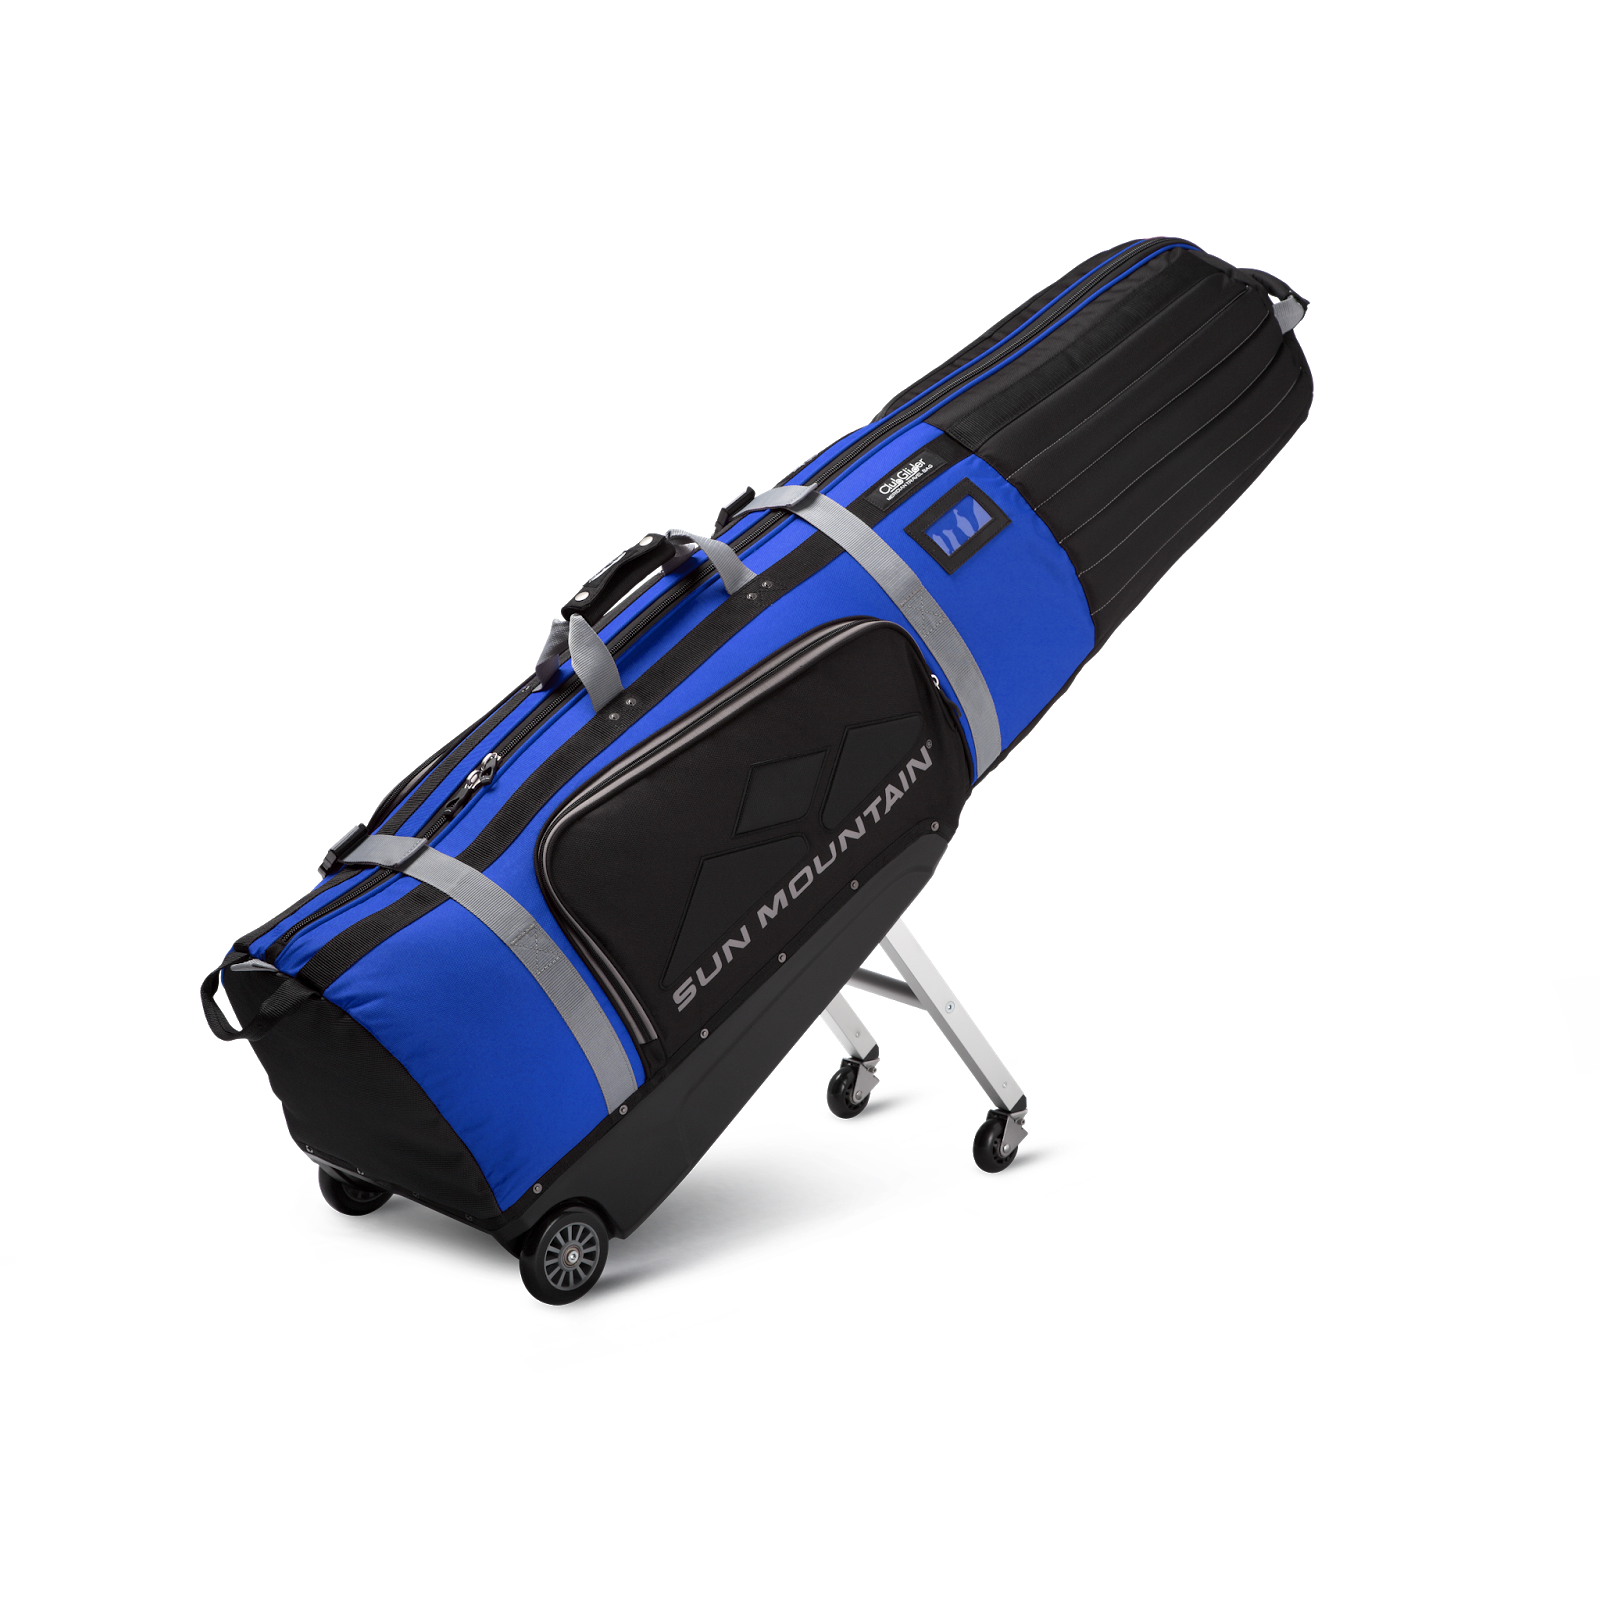 American Golfer: ClubGlider Golf Travel Bag Offers Legs that Support the Weight